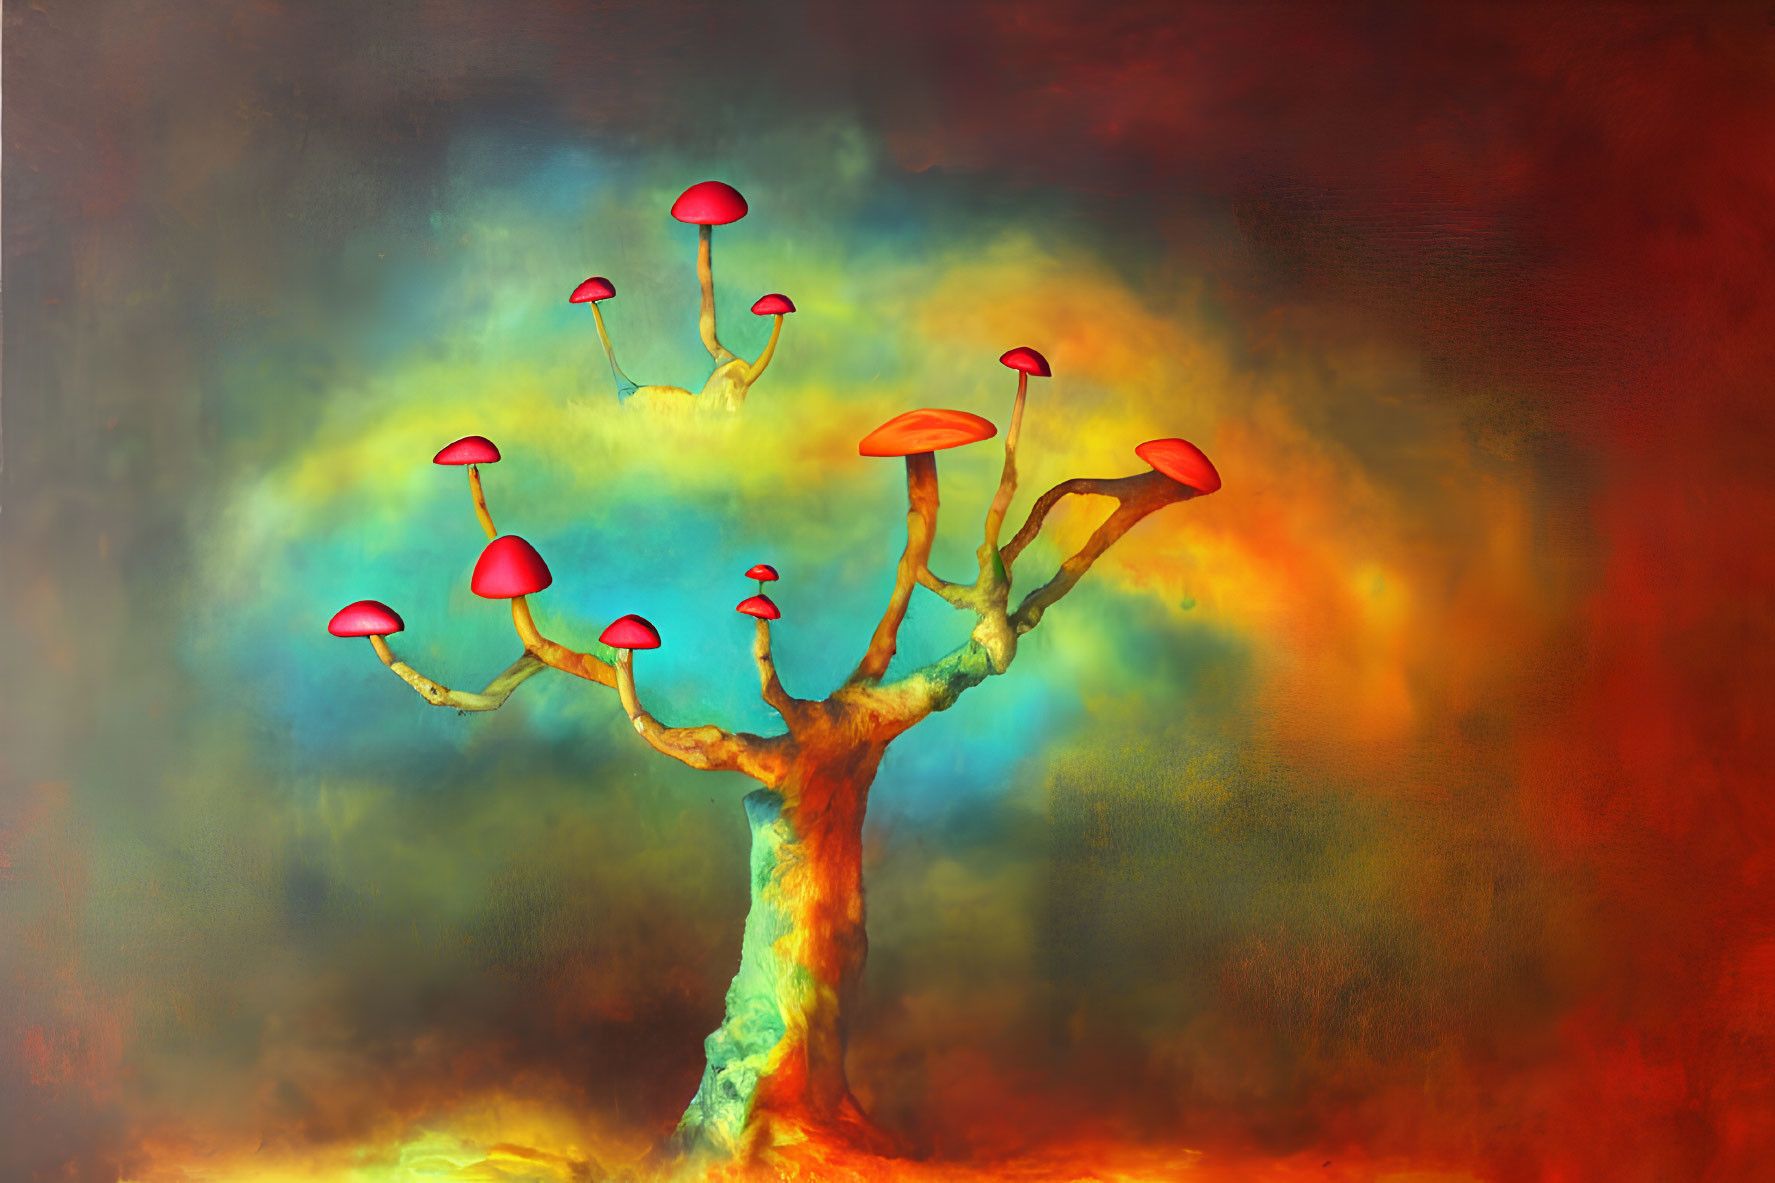 Vibrant surreal painting of tree with red mushroom-like canopies on fiery background